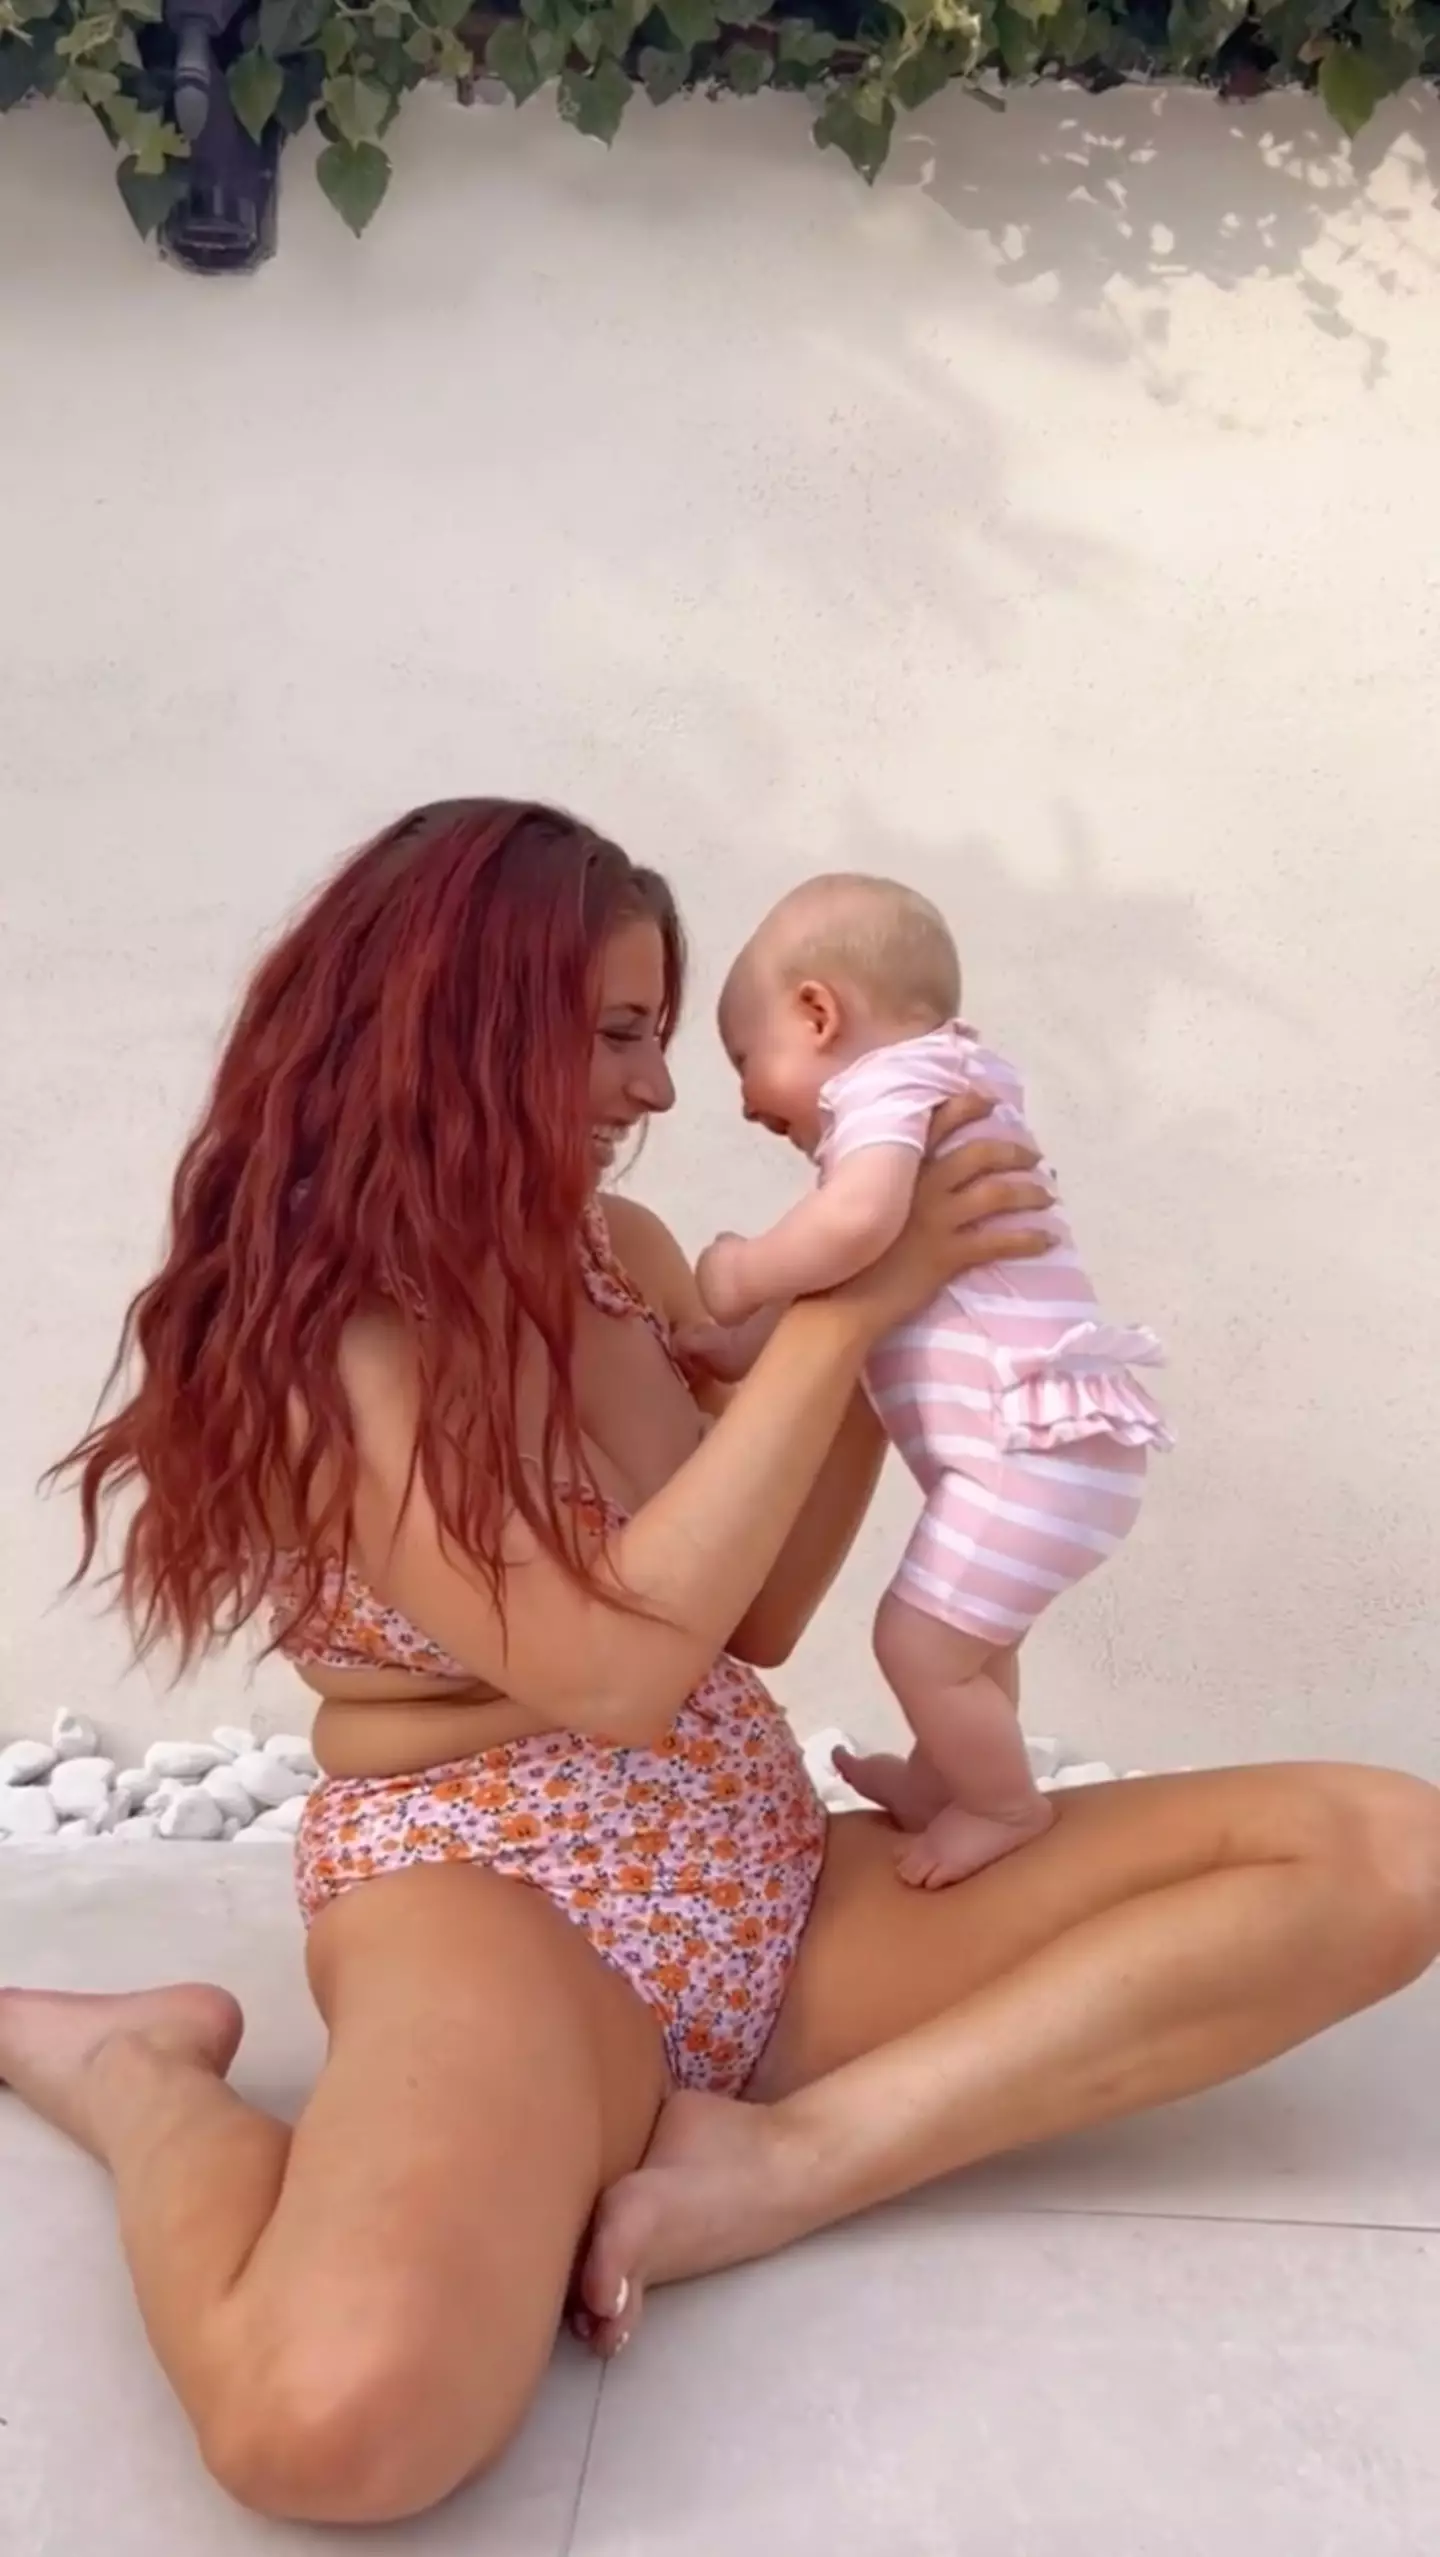 The 32-year-old mum-of-four recently launched a swimwear collection with InTheStyle.